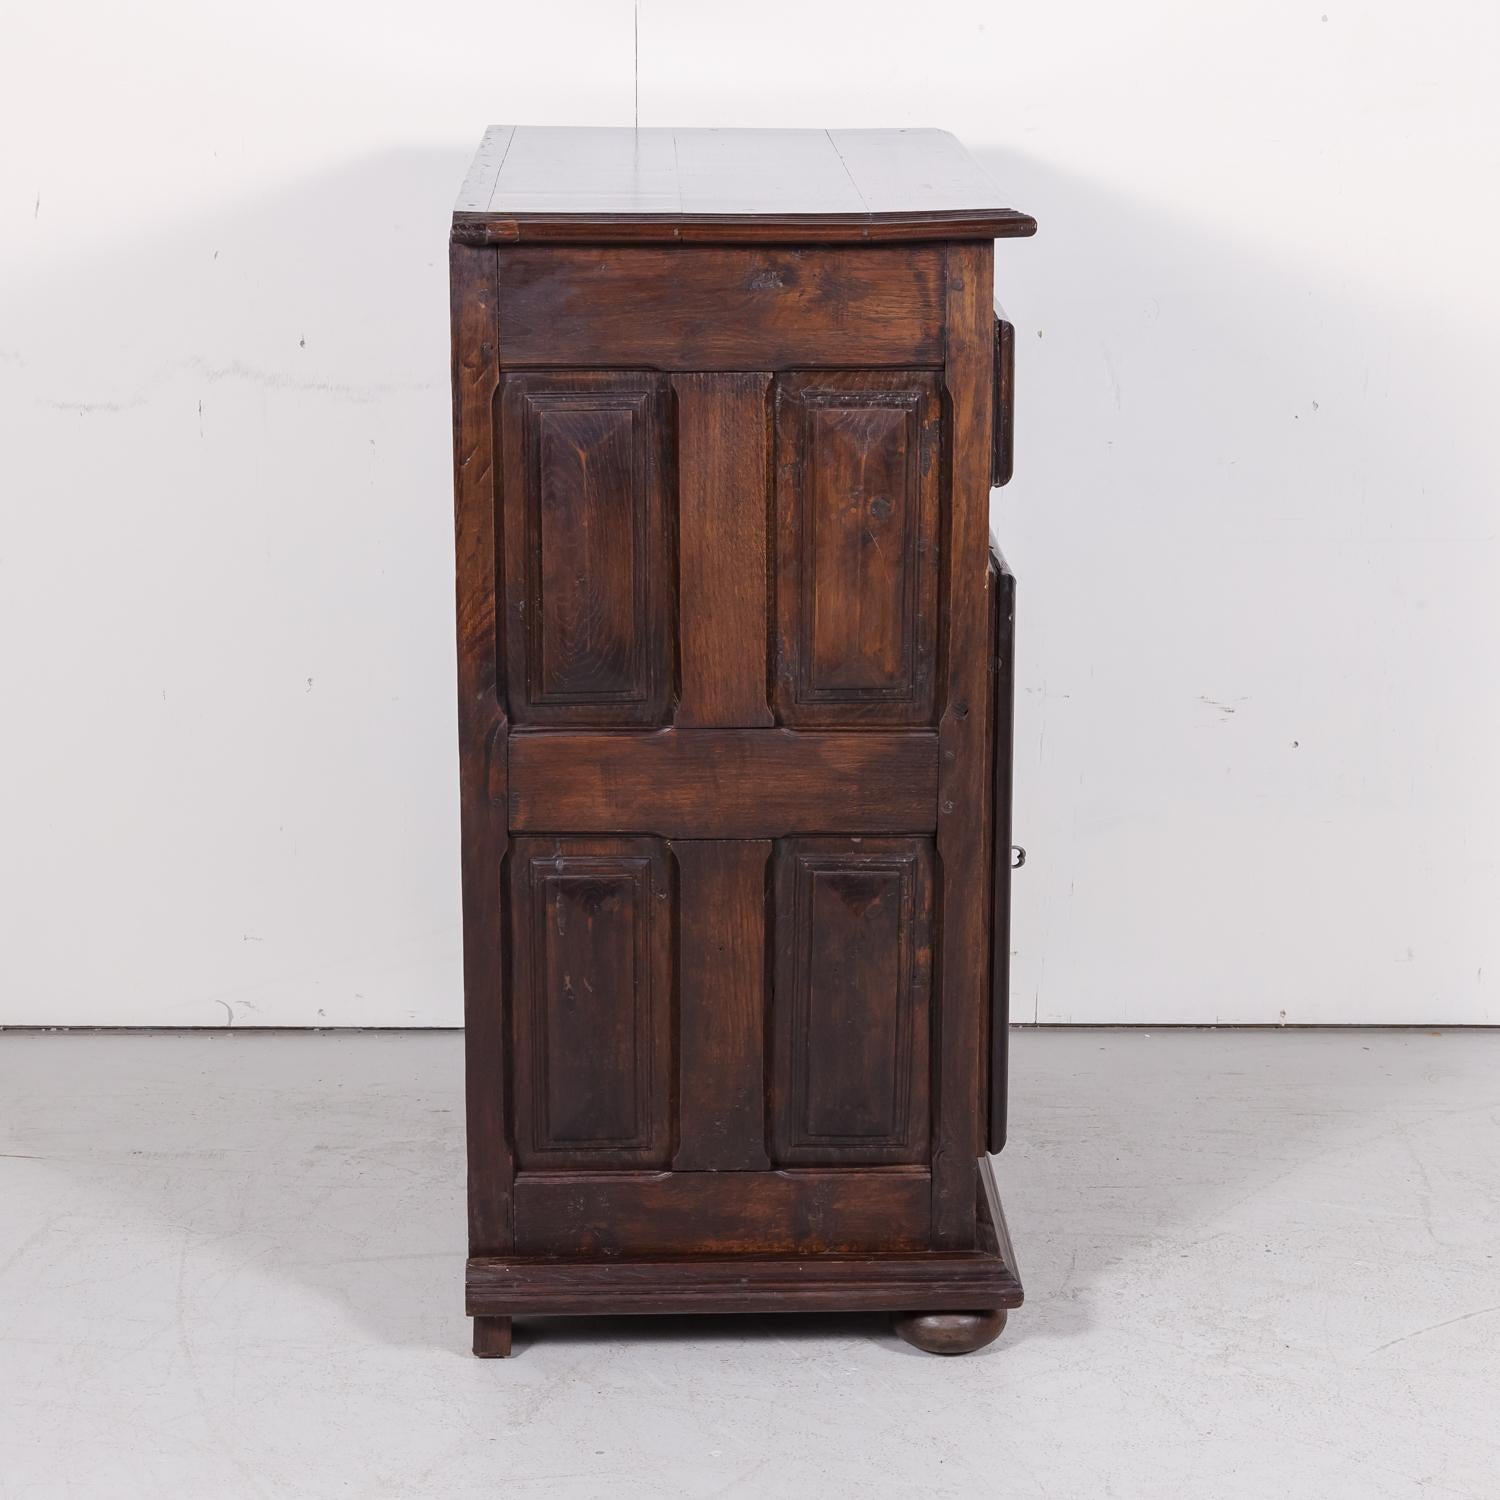 Early 19th Century Louis XIII Oak Jam Cabinet or Confiturier from Normandy For Sale 9